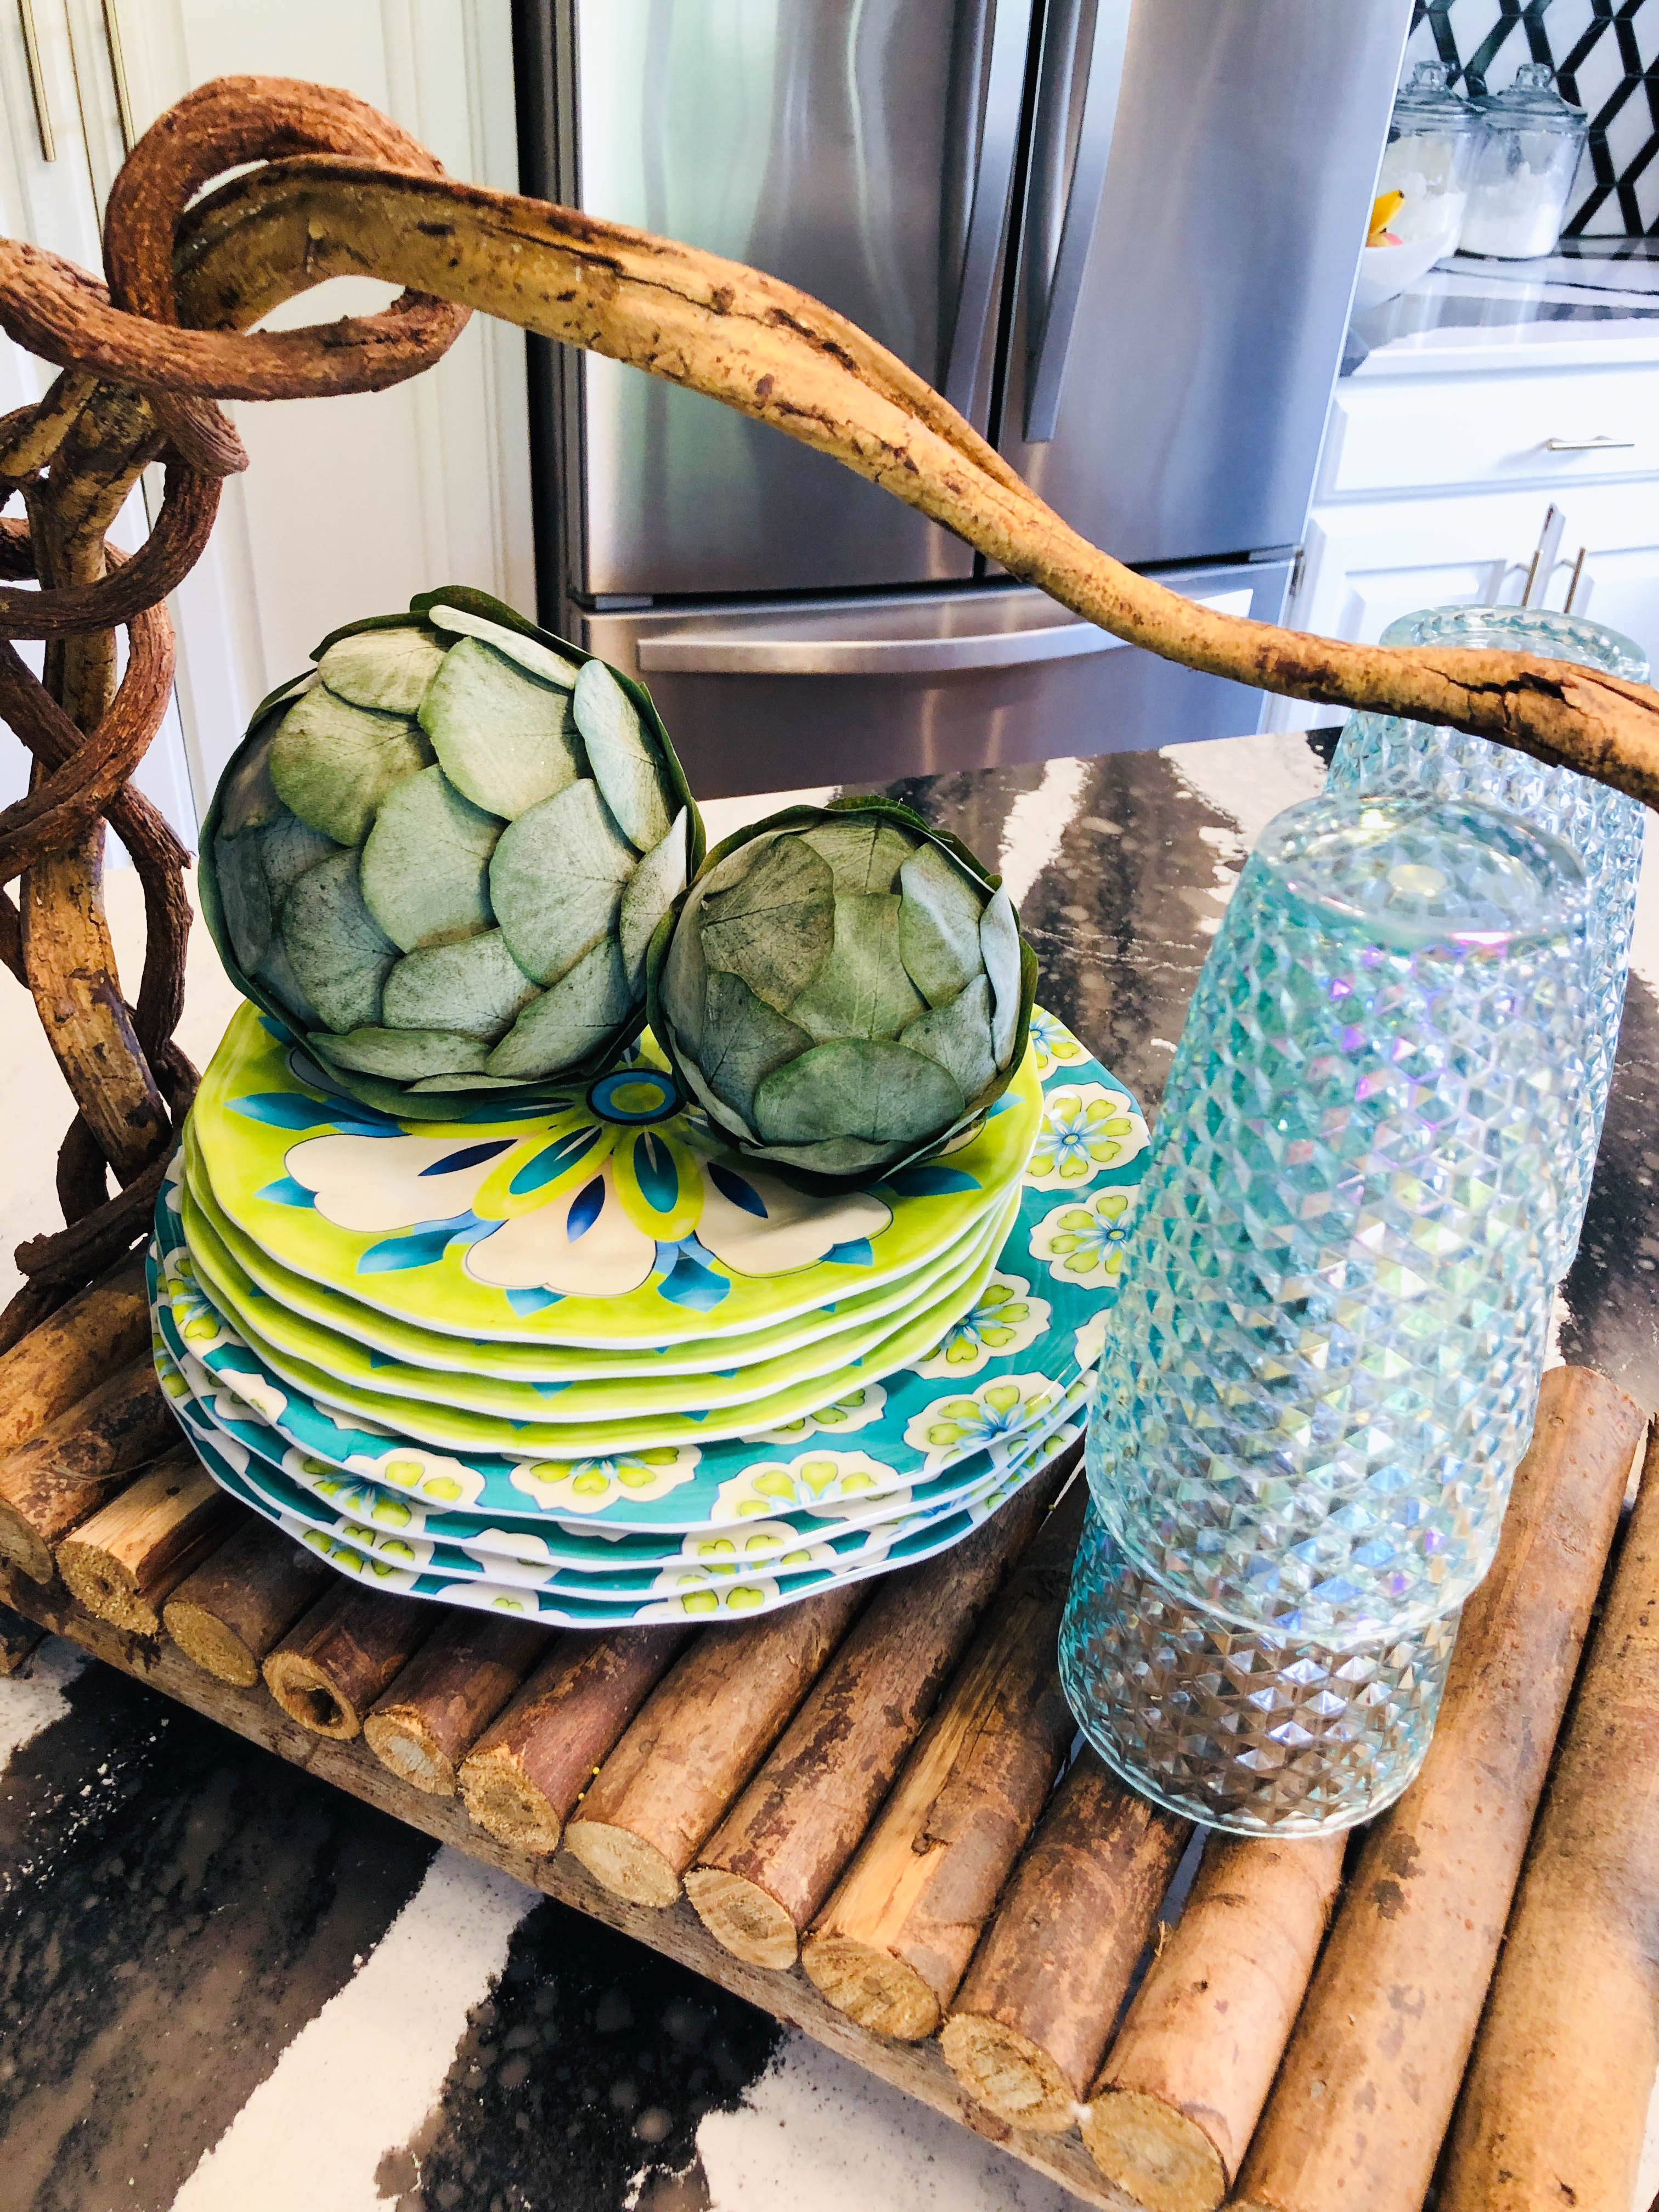 Stacked plates and glasses are a way to decorate your kitchen.